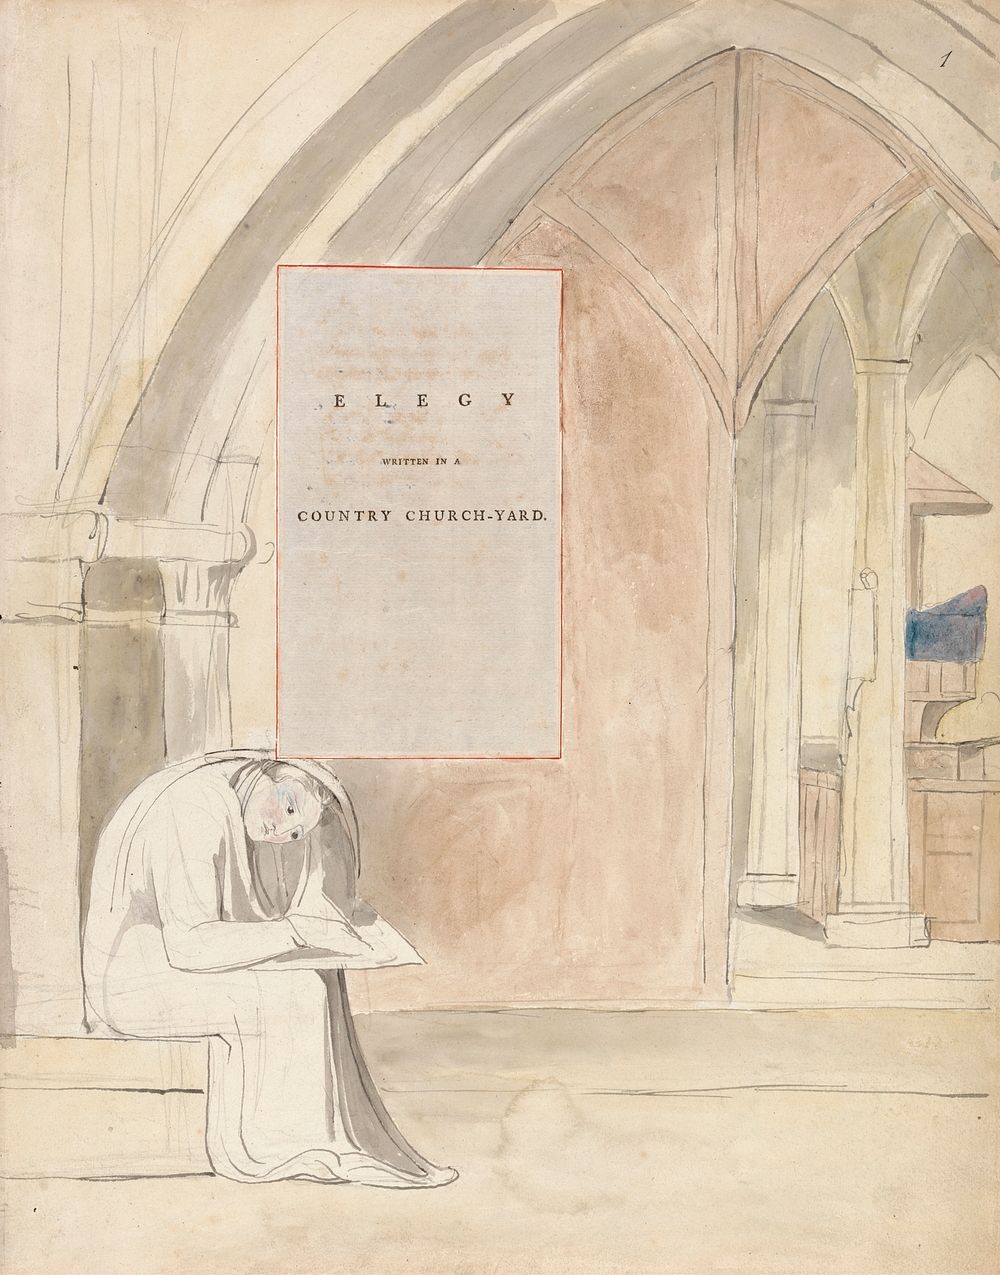 The Poems of Thomas Gray, Design 105, "Elegy Written in a Country Church-Yard." by William Blake. Original from Yale Center…